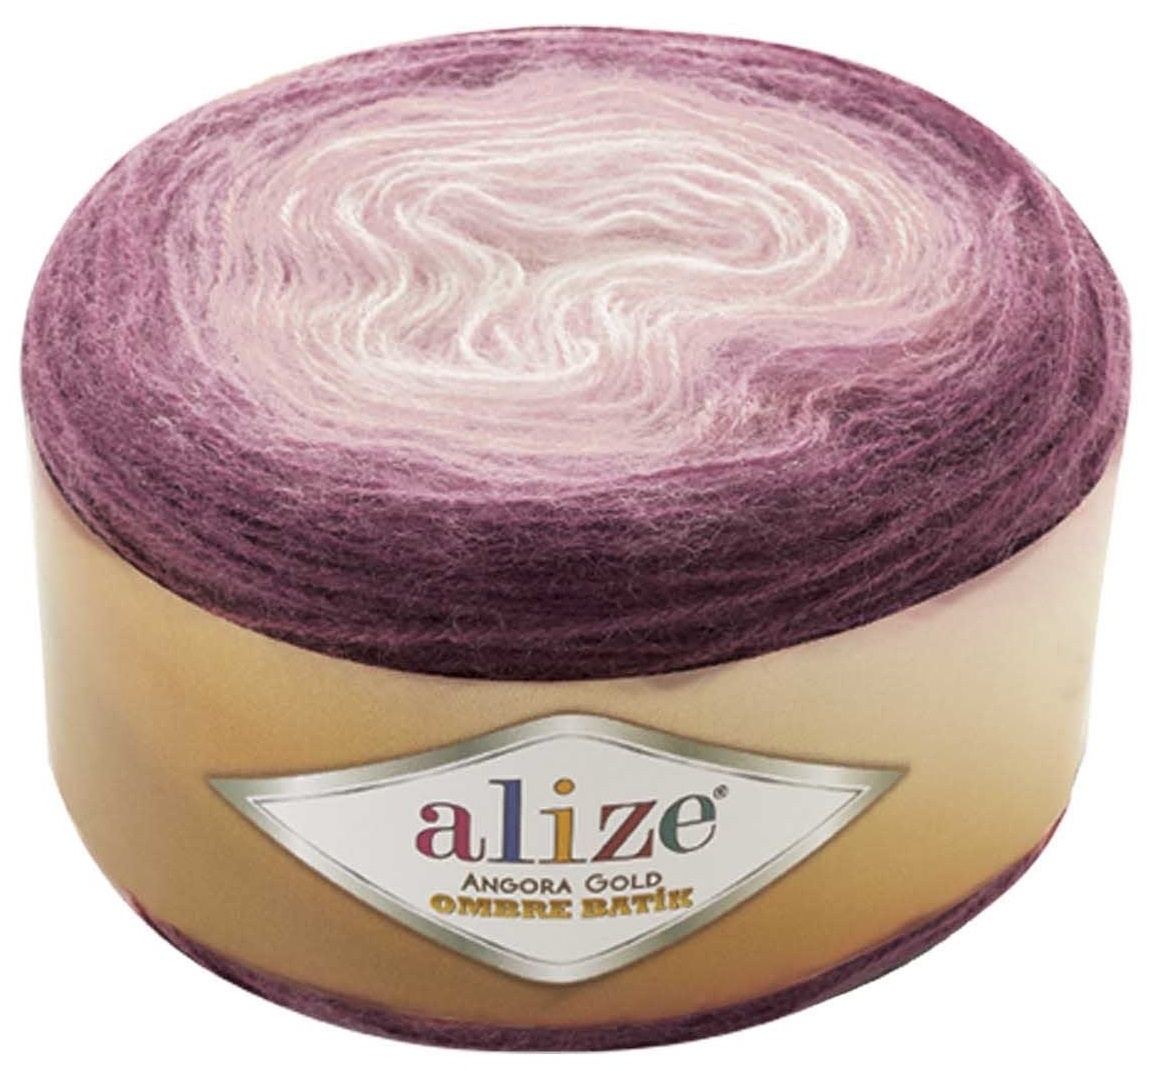 Alize Angora Gold Ombre Batik, 20% Wool, 80% Acrylic 4 Skein Value Pack, 600g фото 4